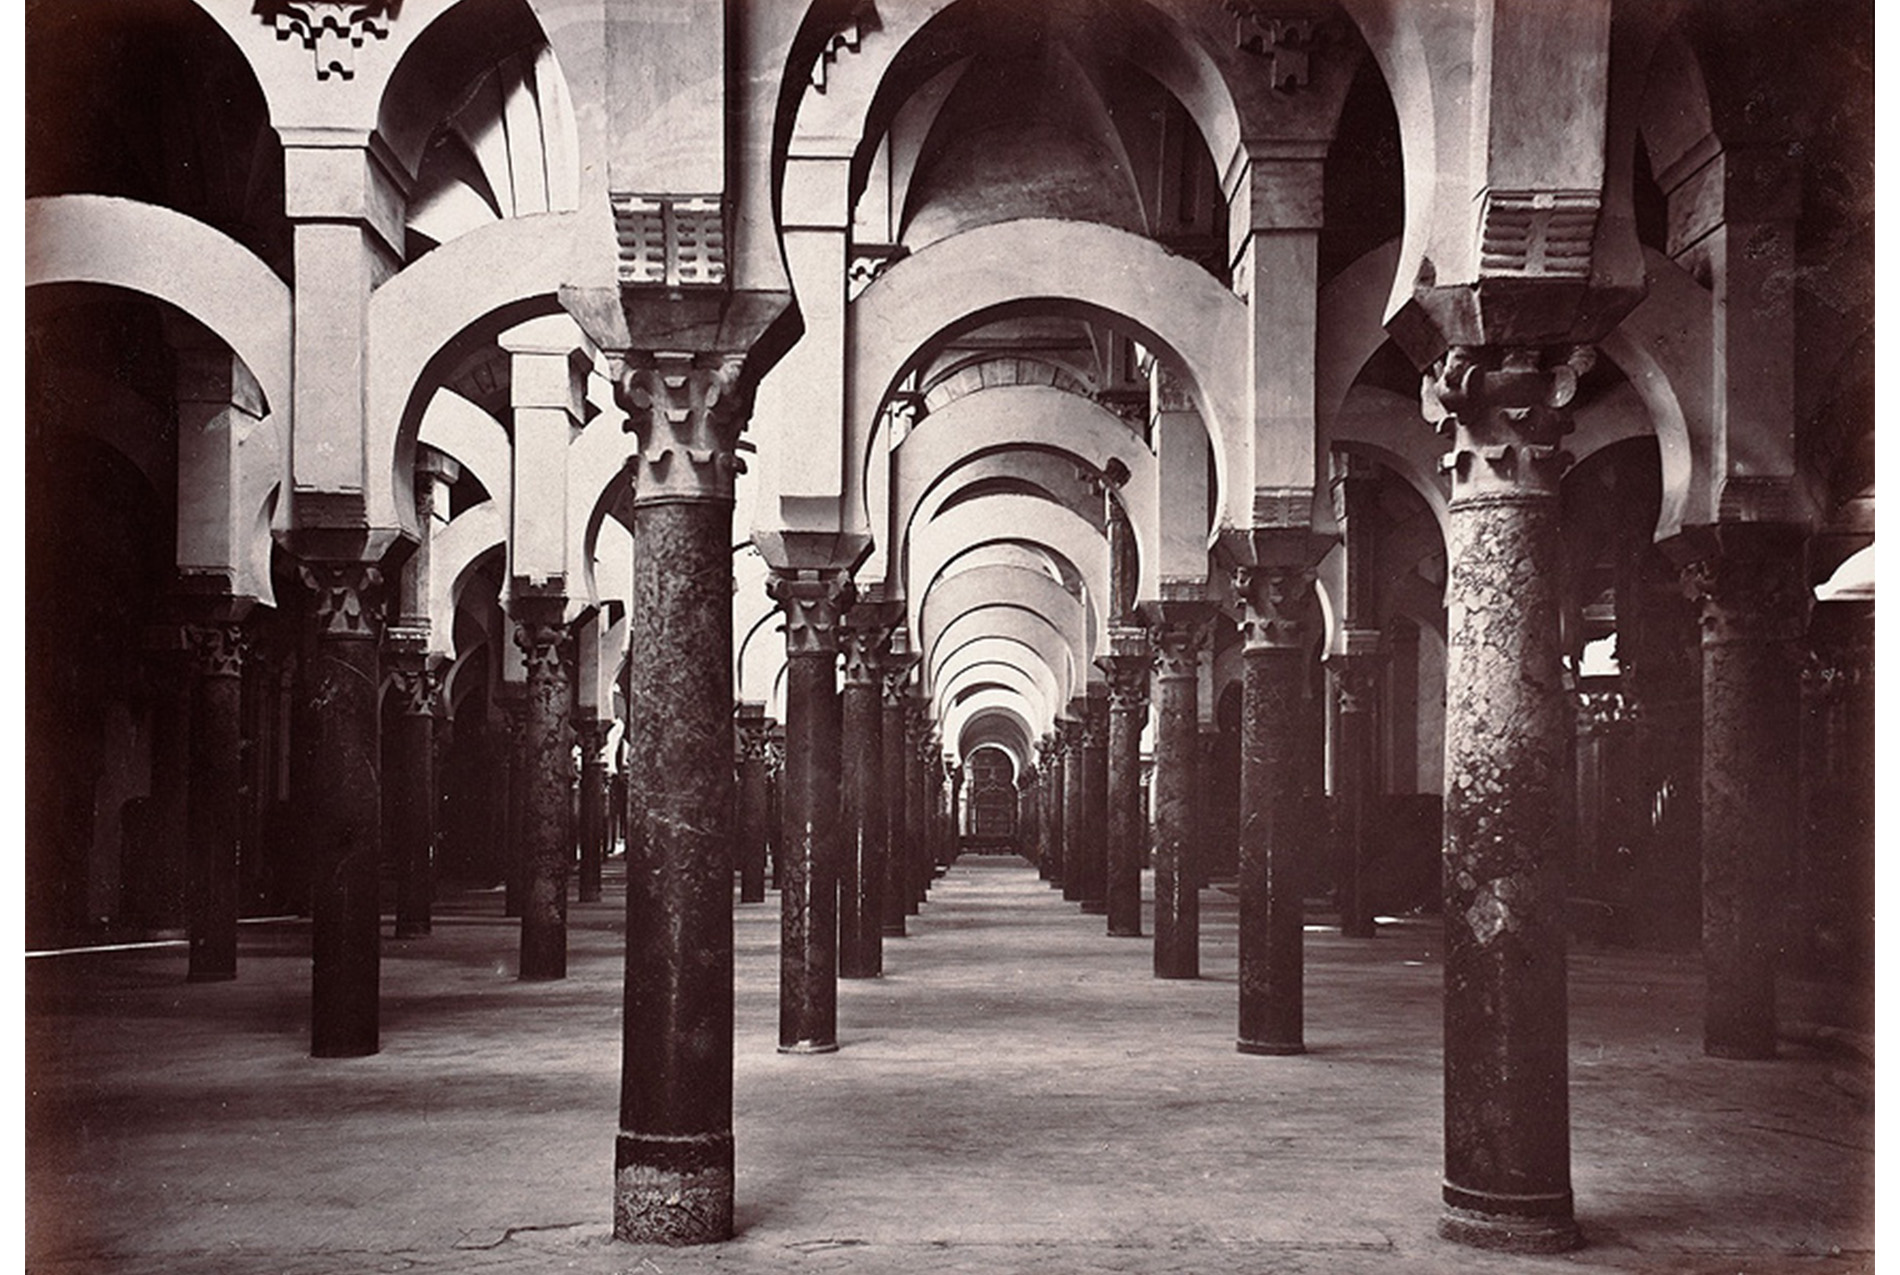 interior hall of a mosque, with columns from floor to ceiling and arches along the ceiling